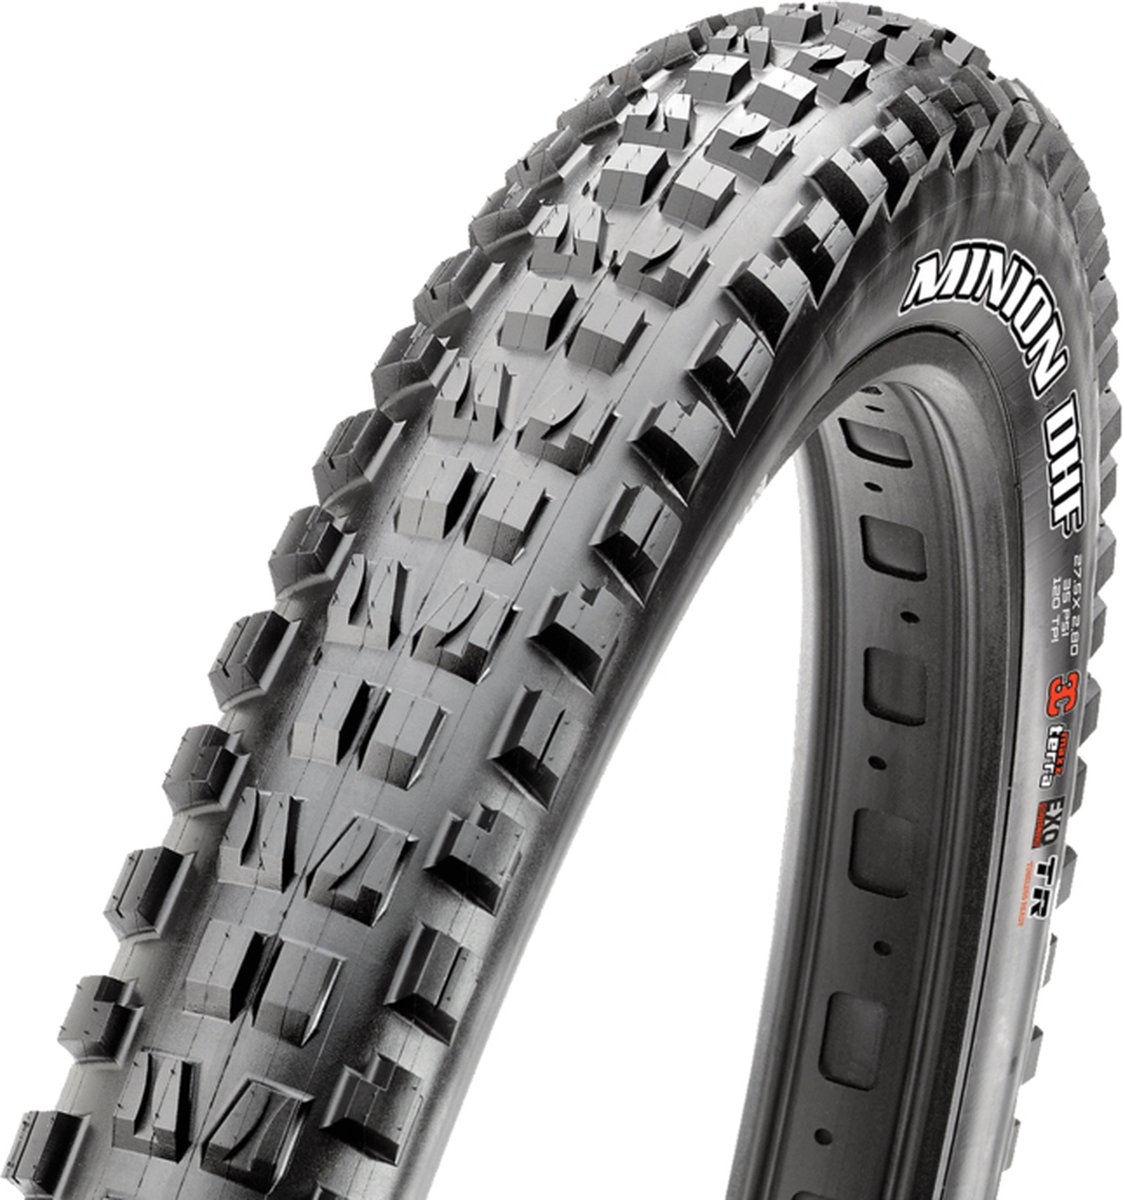 Maxxis Minion DHF+ TLR Folding Tyre 27.5x2.80